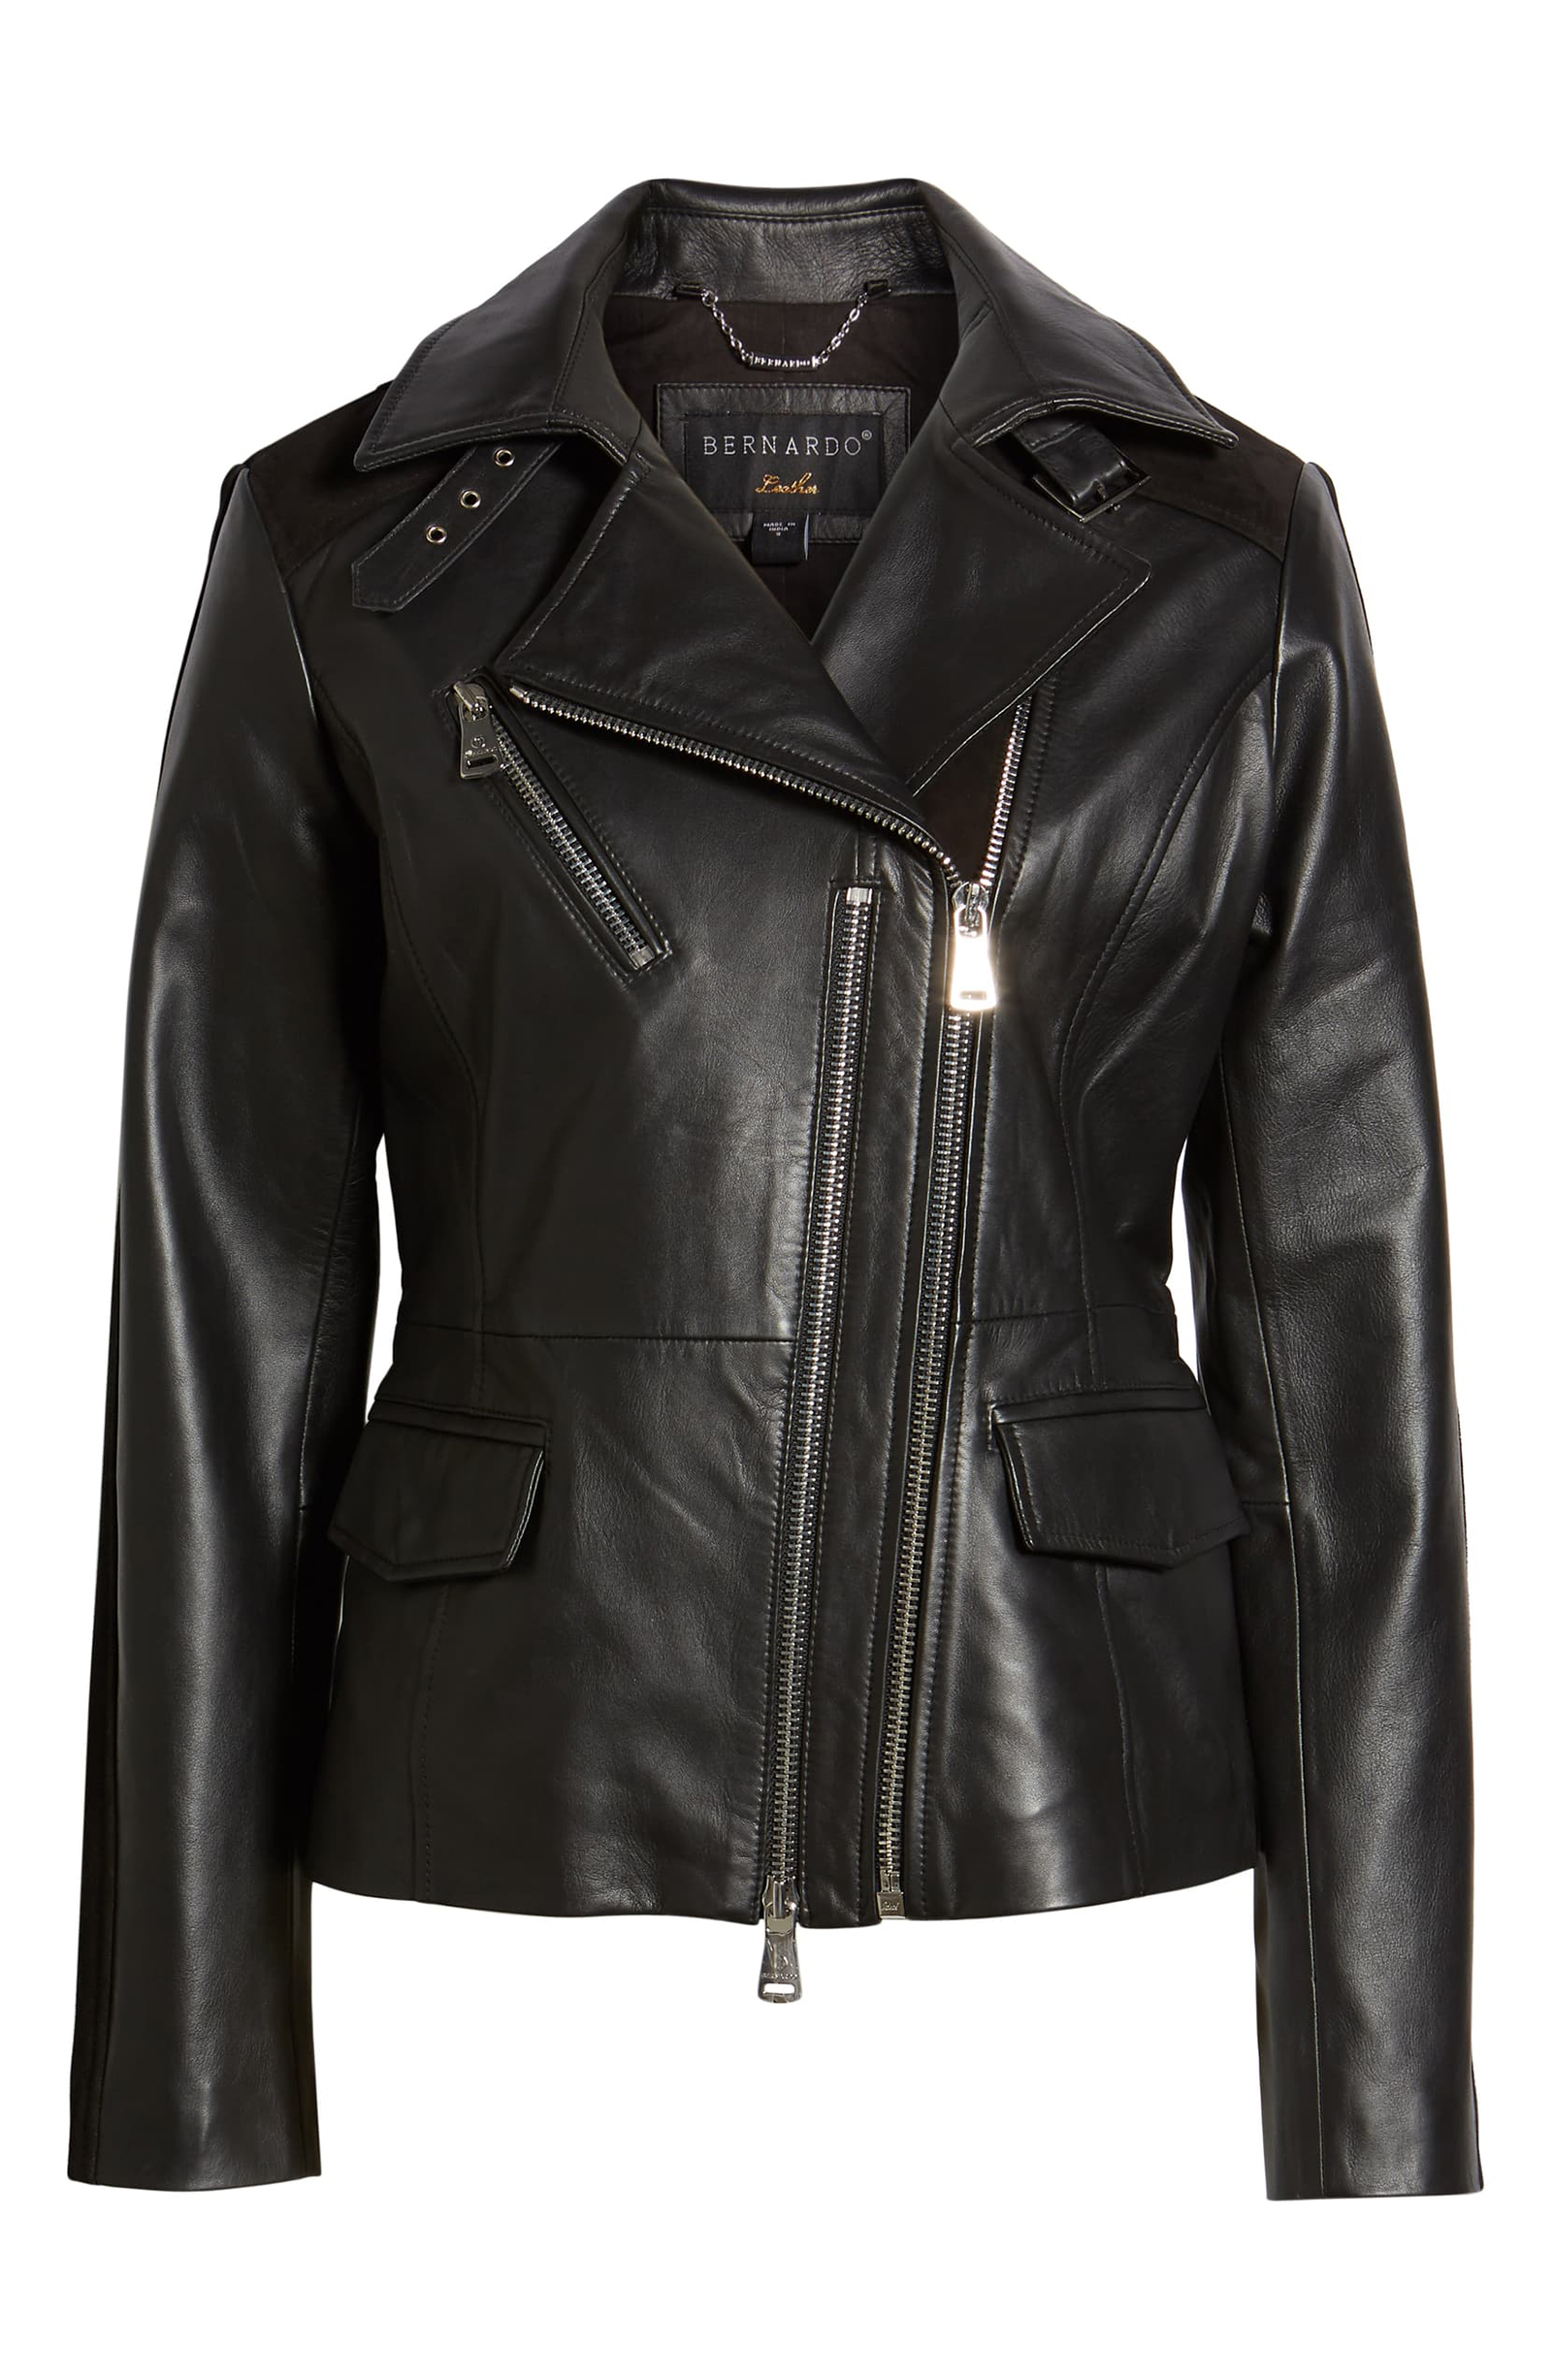 The Nordstrom Anniversary Sale Has the Leather Jacket You'll Wear